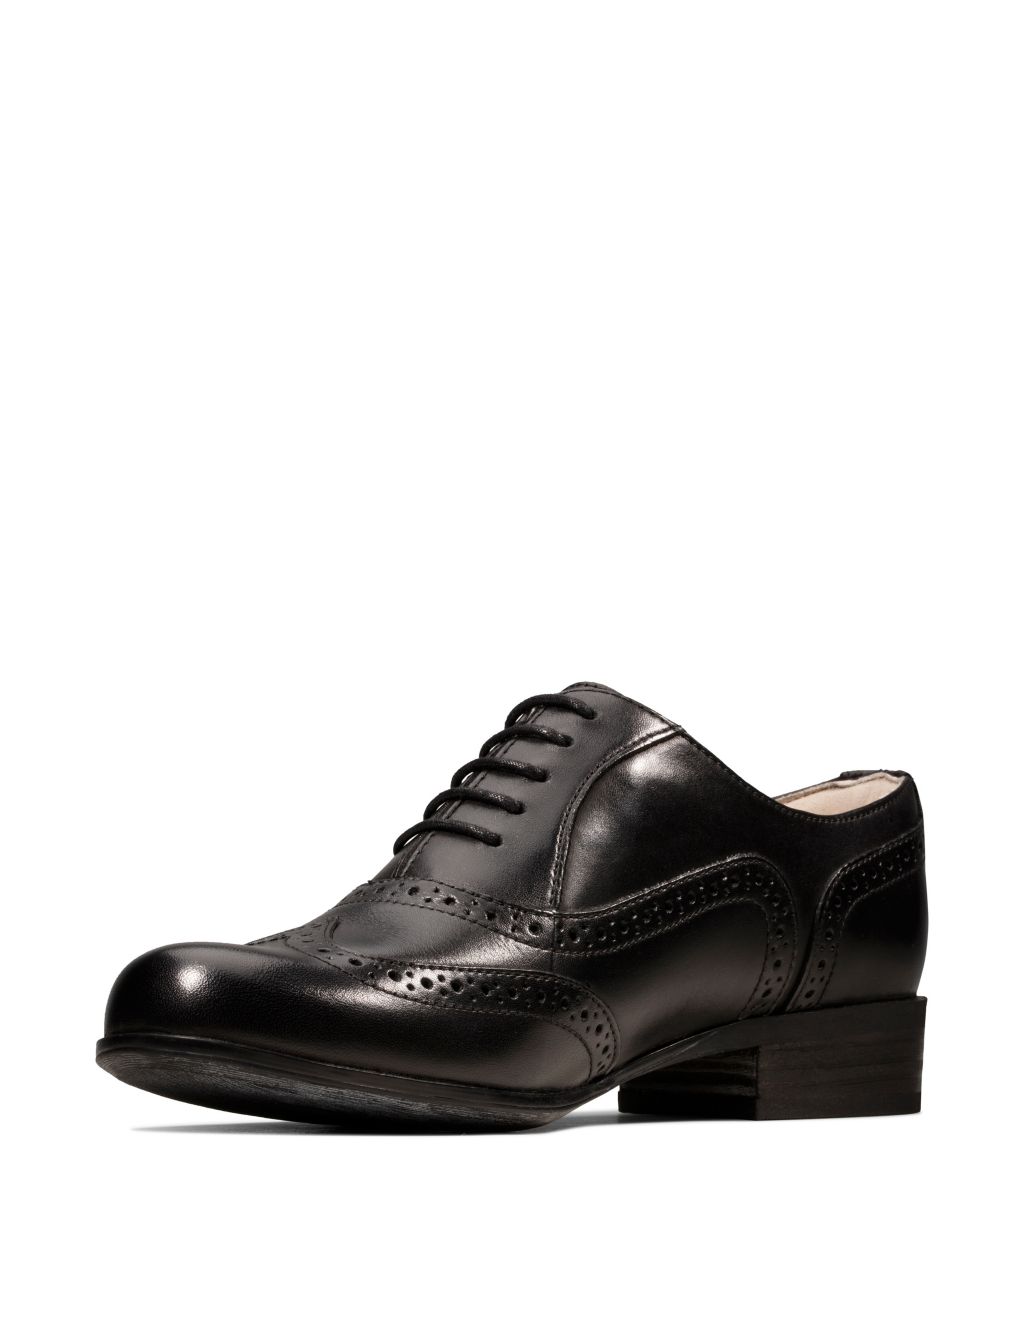 Wide Fit Leather Flat Brogues image 4